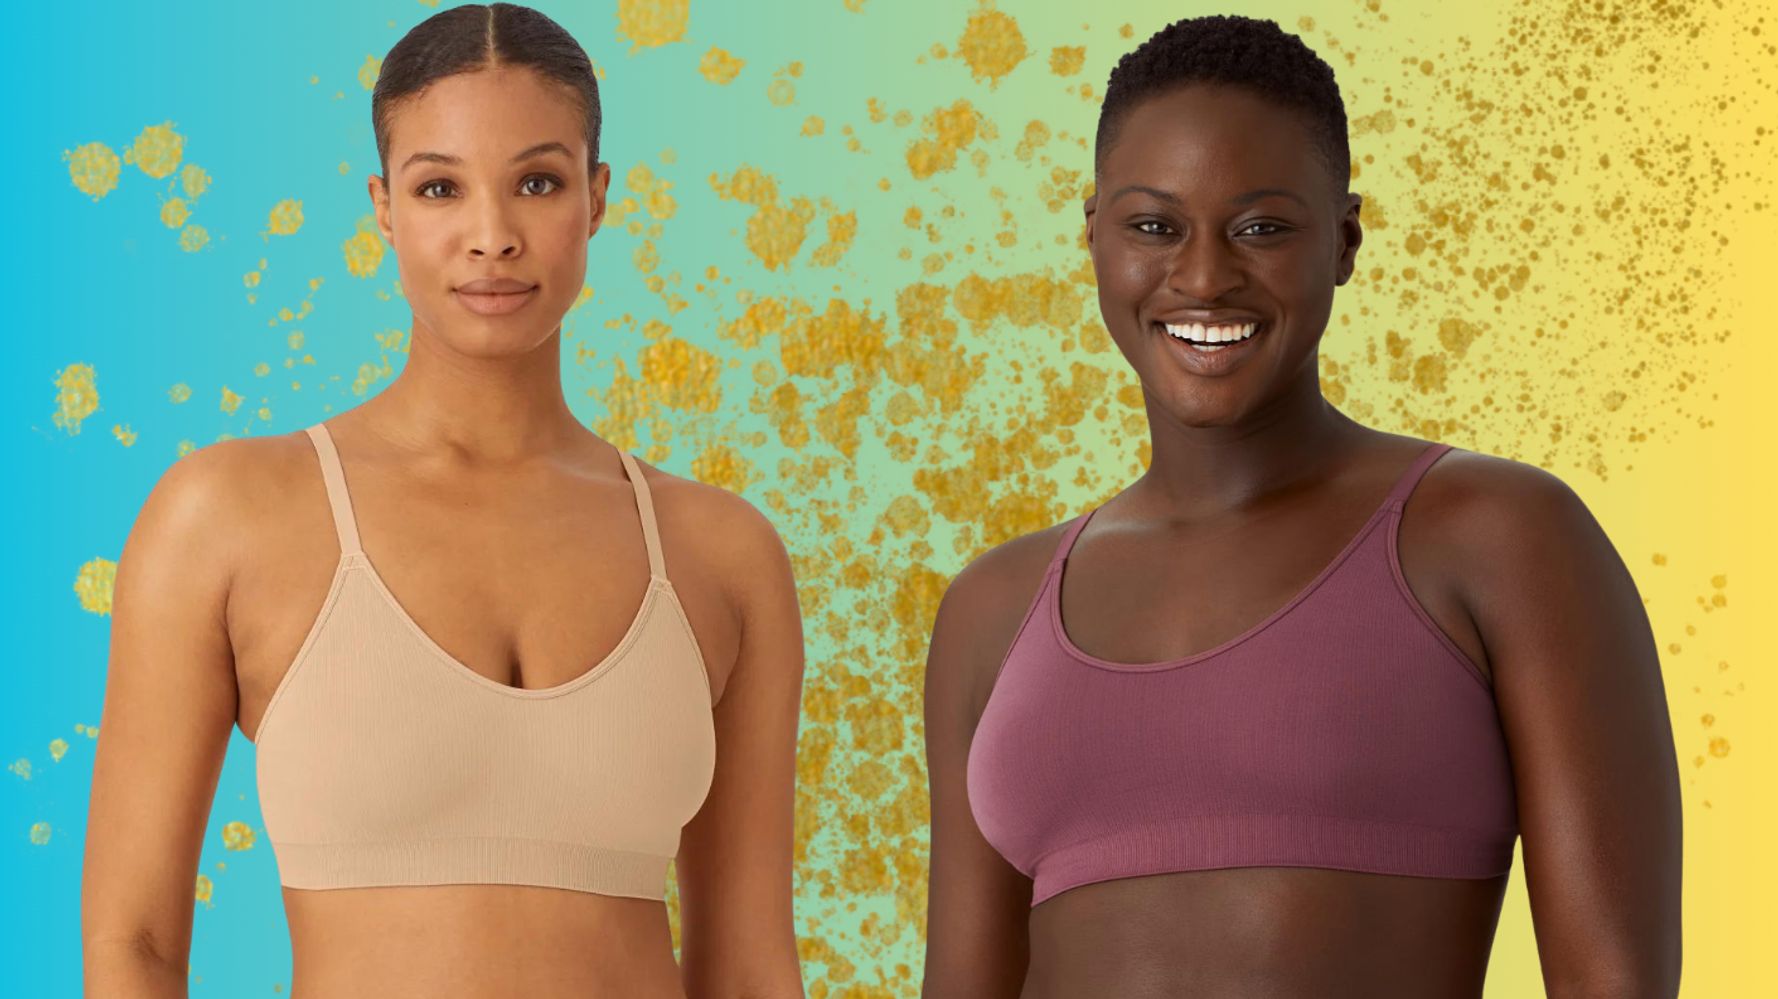 Bras N Things: $20 OFF selected bras*, New styles bound to turn heads